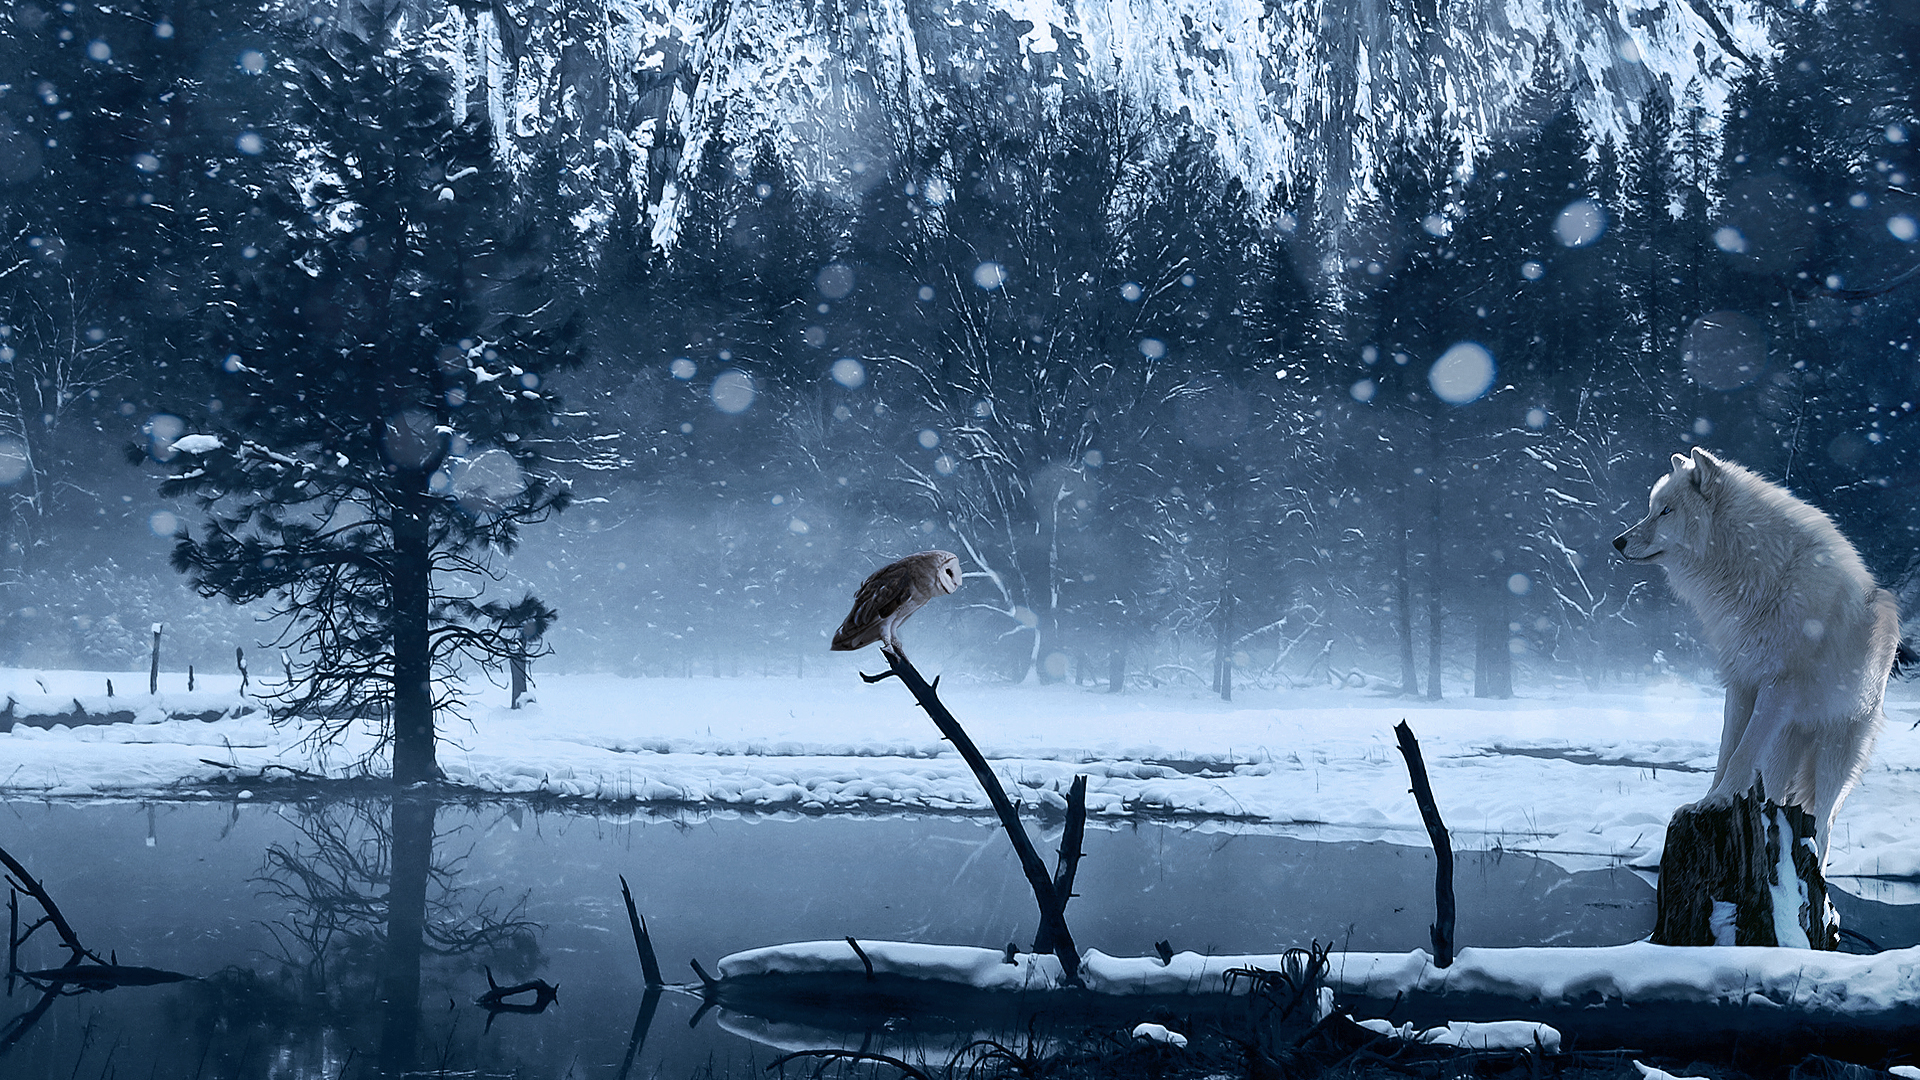 Art Winter Wolf Owl Snow Lake Wallpaper Photos Pictures